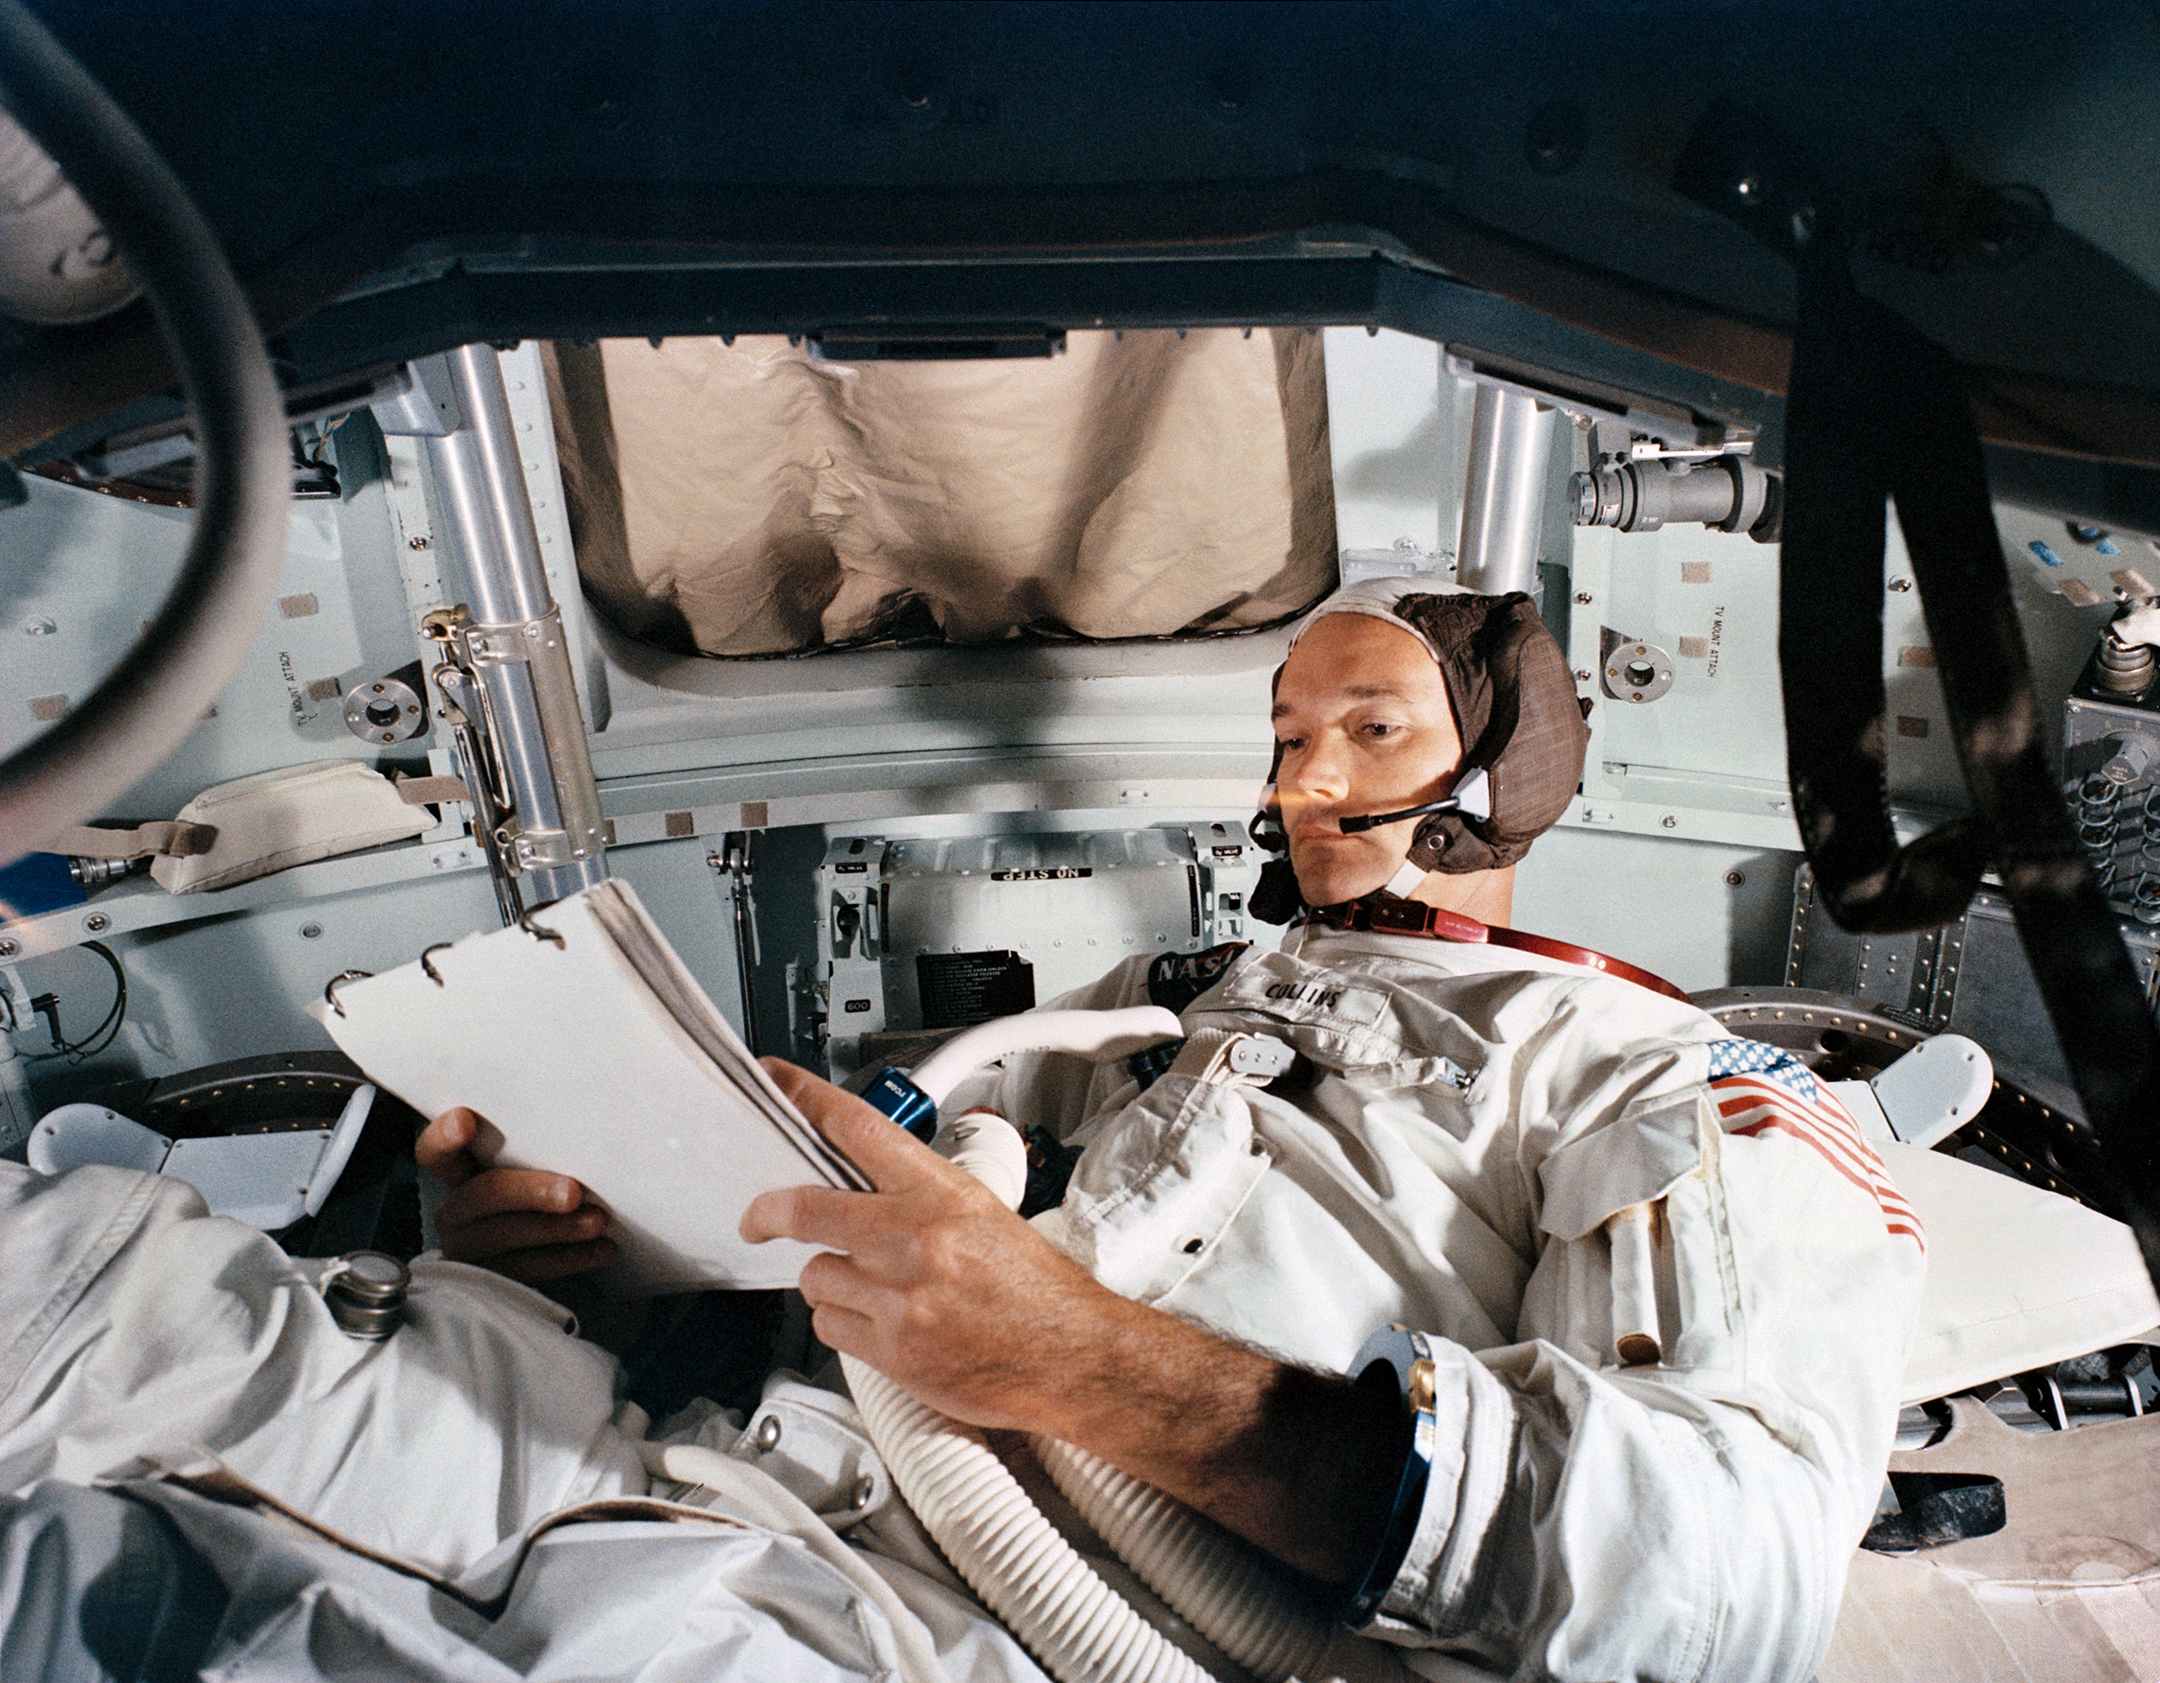 Astronaut Michael Collins, in his space suit, looking over documents in a space capsule